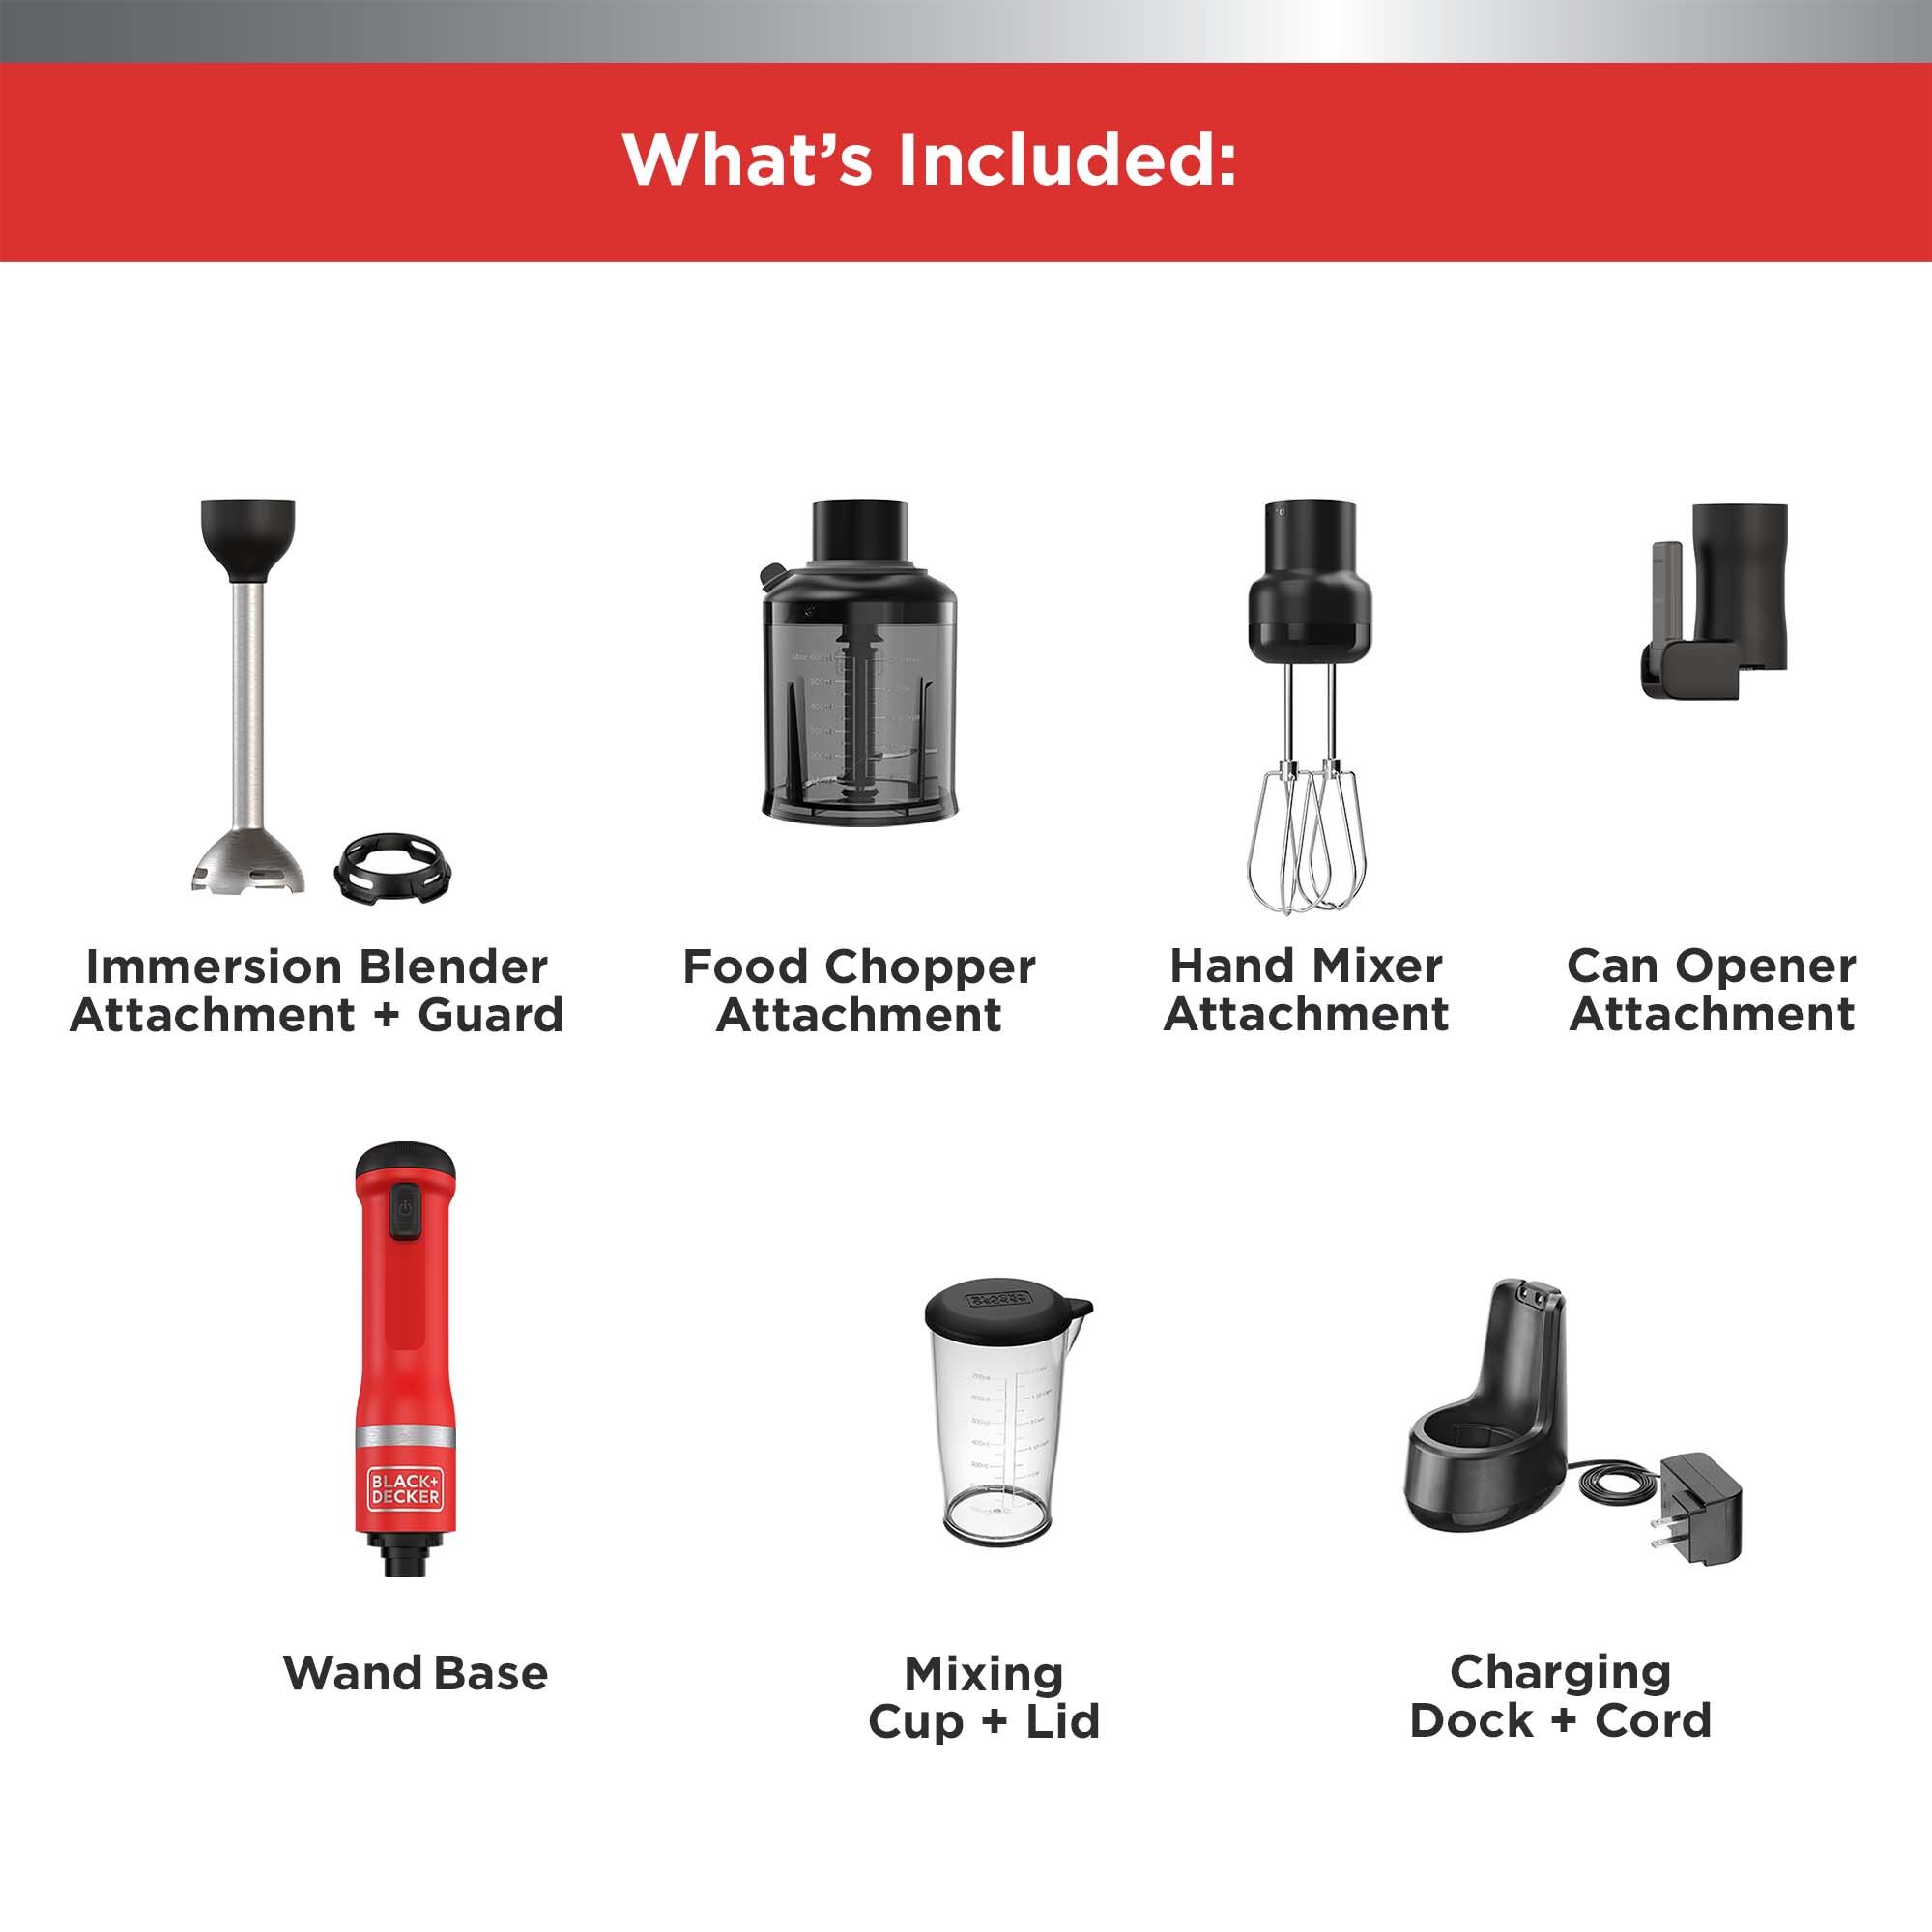 Food chopper, hand mixer, can opener and immersion attachments are all included in the BLACK+DECKER kitchen wand™ four kit